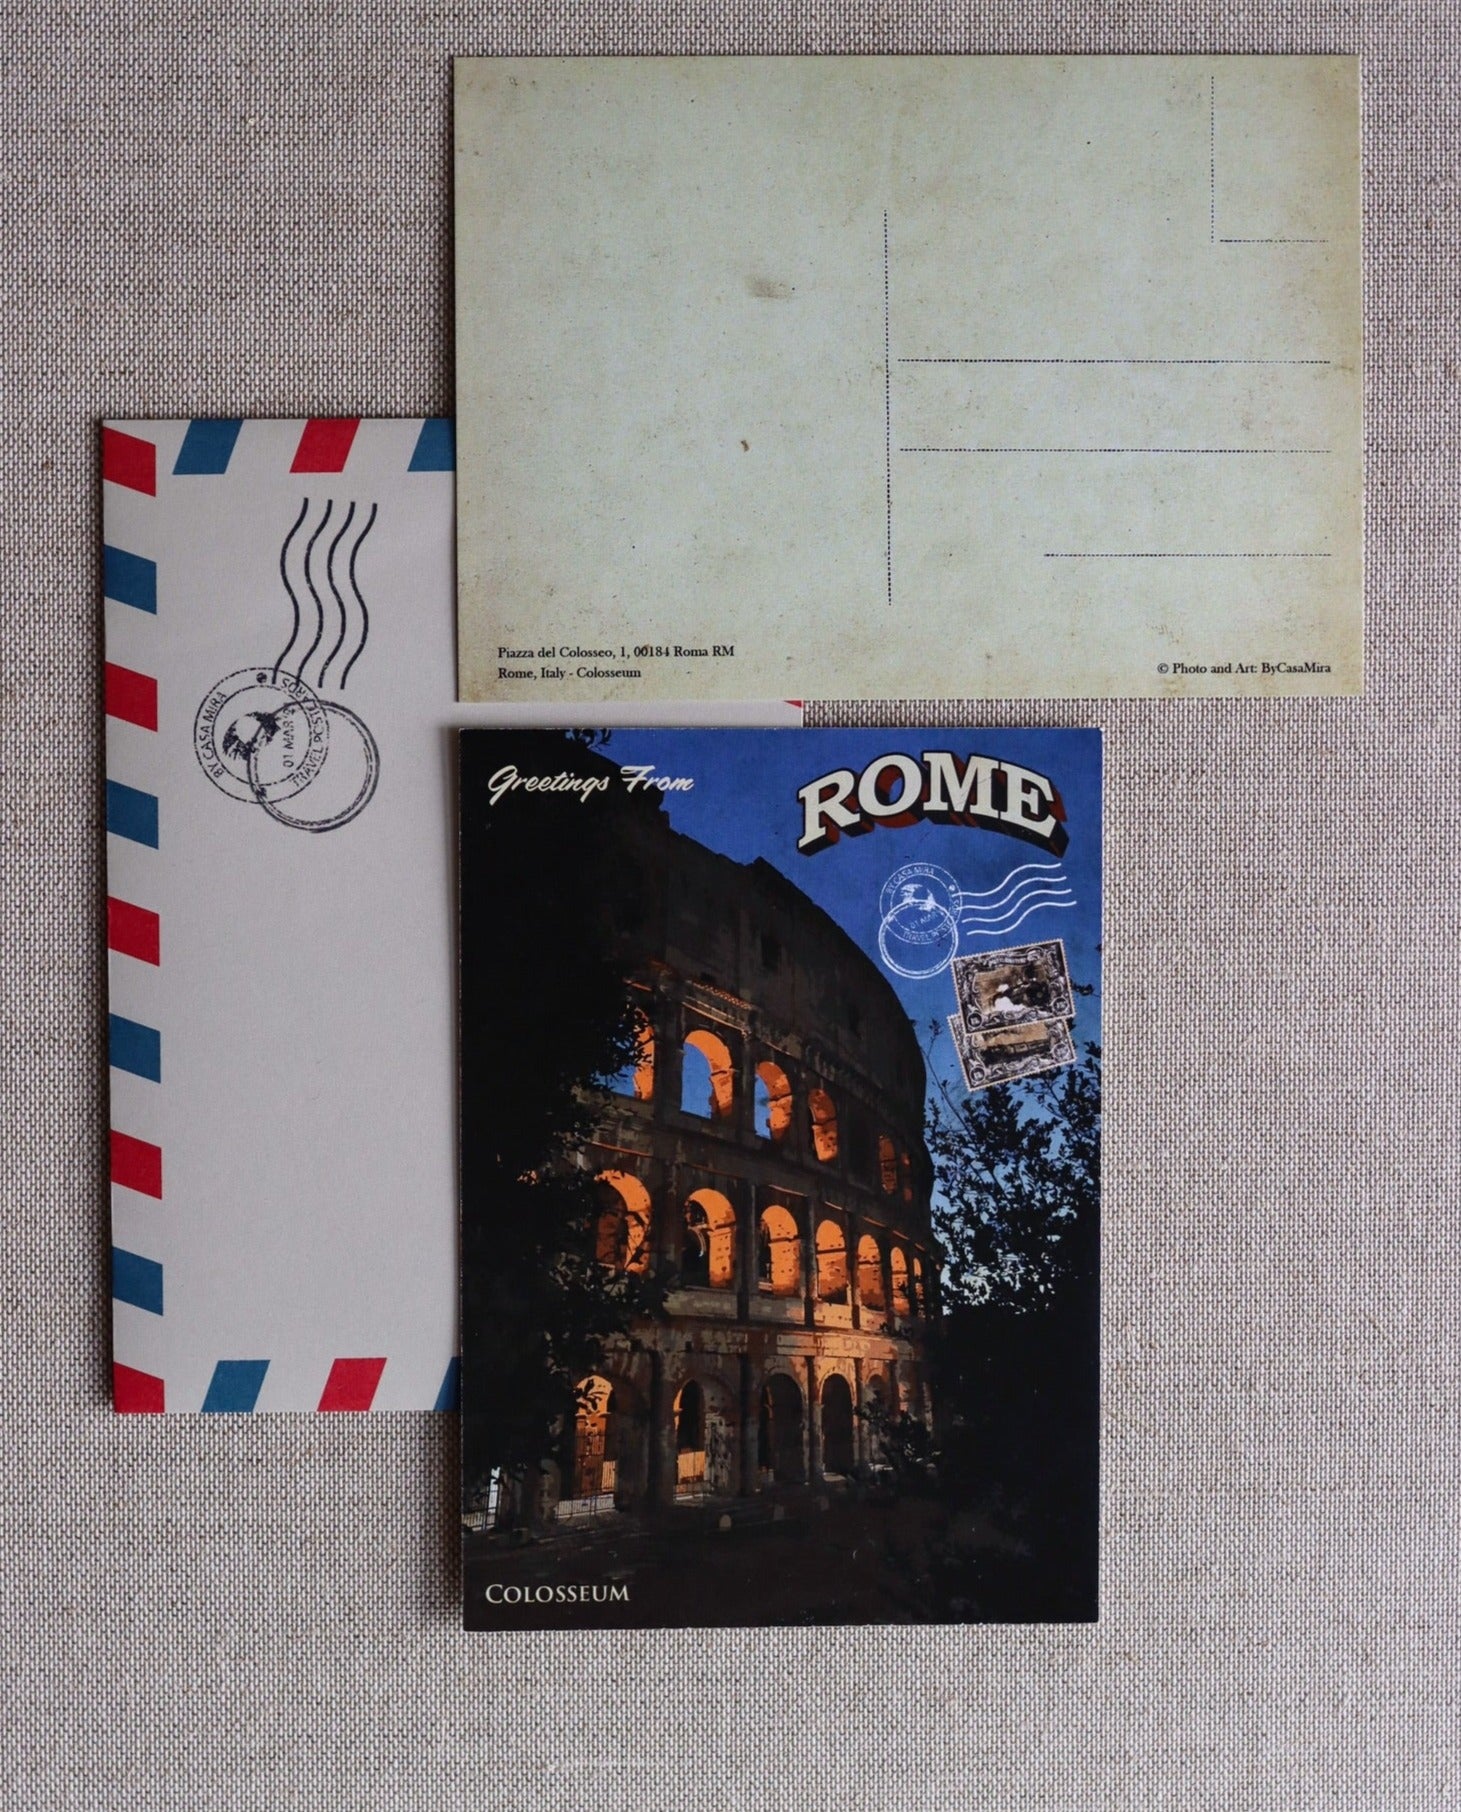 Set of 20 Collectable Italian Postcards Italy Travel Postcards Pack 4 X 6  or 10 X 15 Cm 5 X 7 or 12.5 X 17.5 Cm 